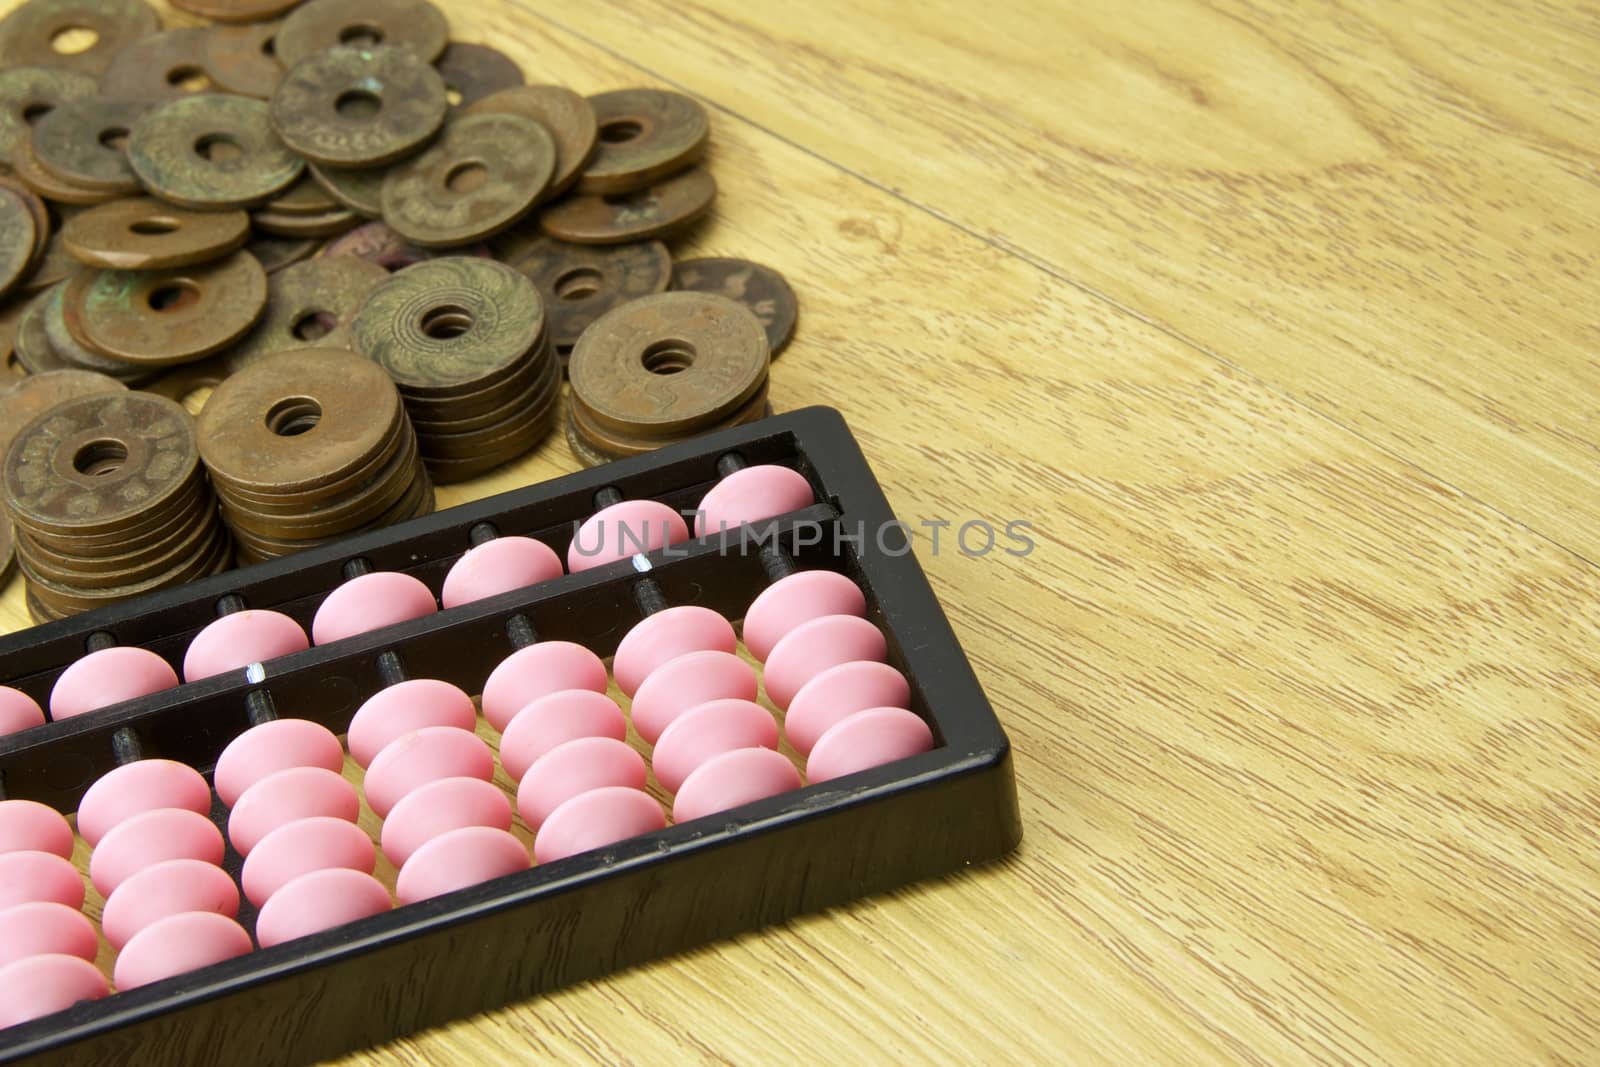 Pile of old ancient coins of Thailand and abacus place with wood background.